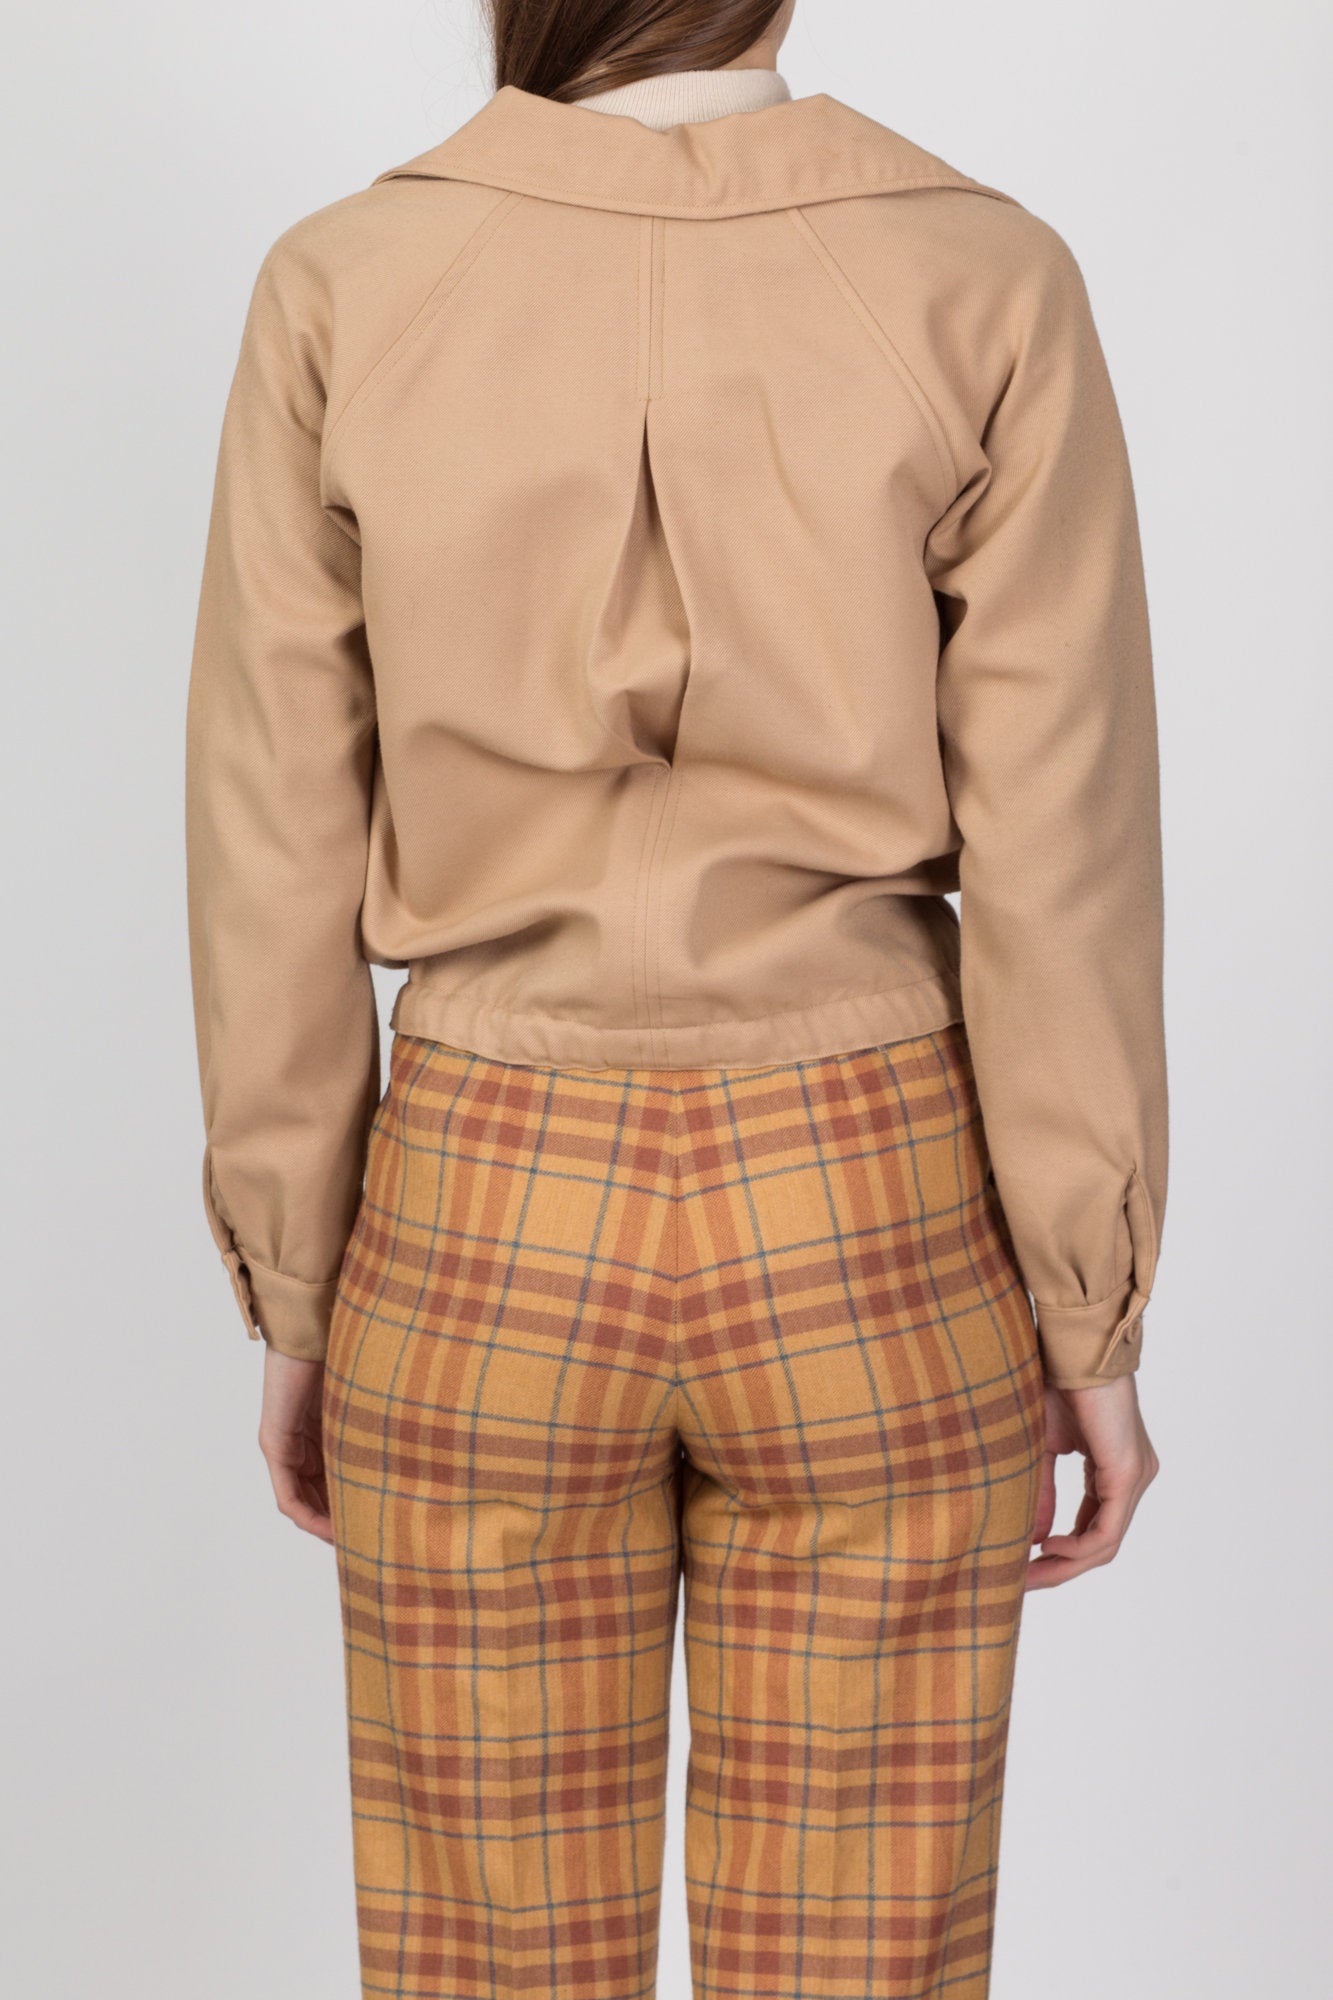 70s Tan Cropped Cinched Waist Jacket - Small to Medium 